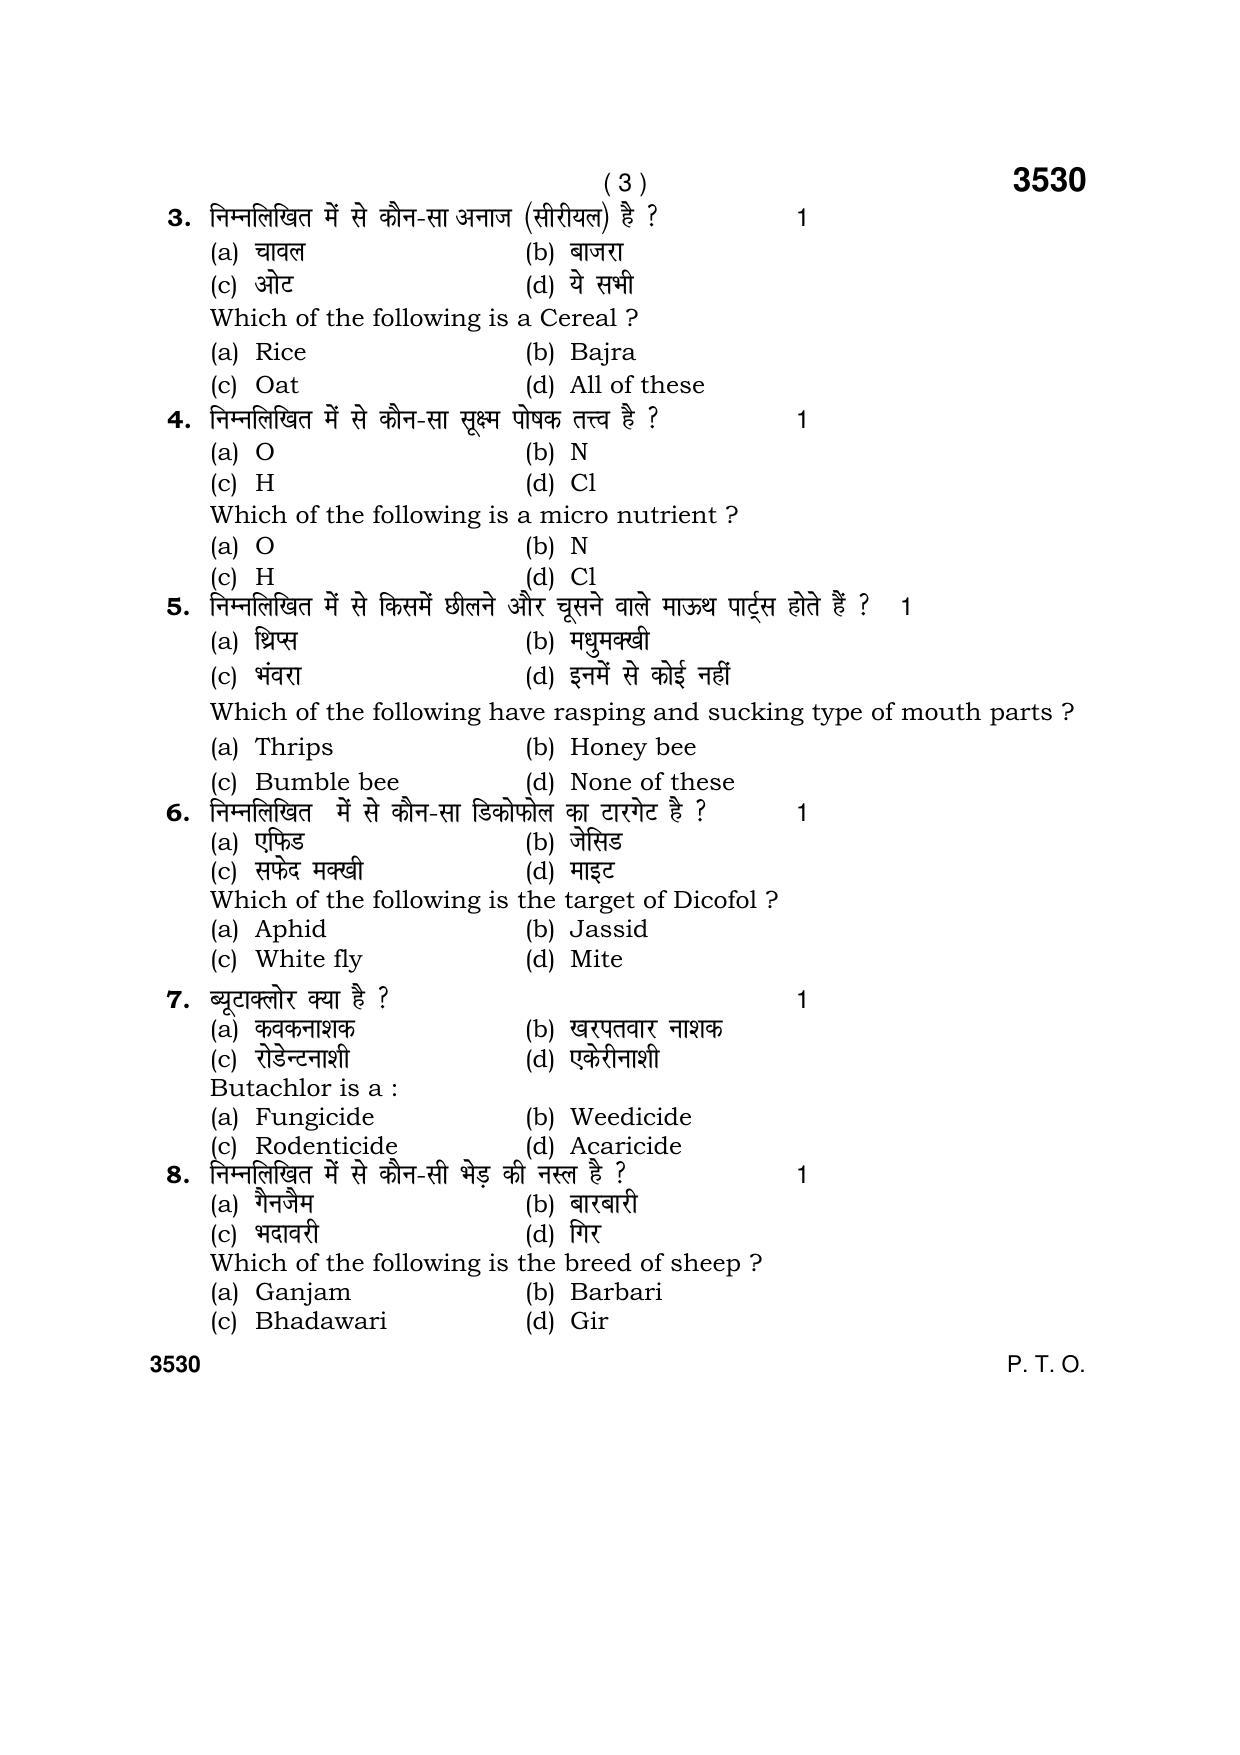 Haryana Board HBSE Class 10 Agriculture Paddy Farming 2018 Question Paper - Page 3